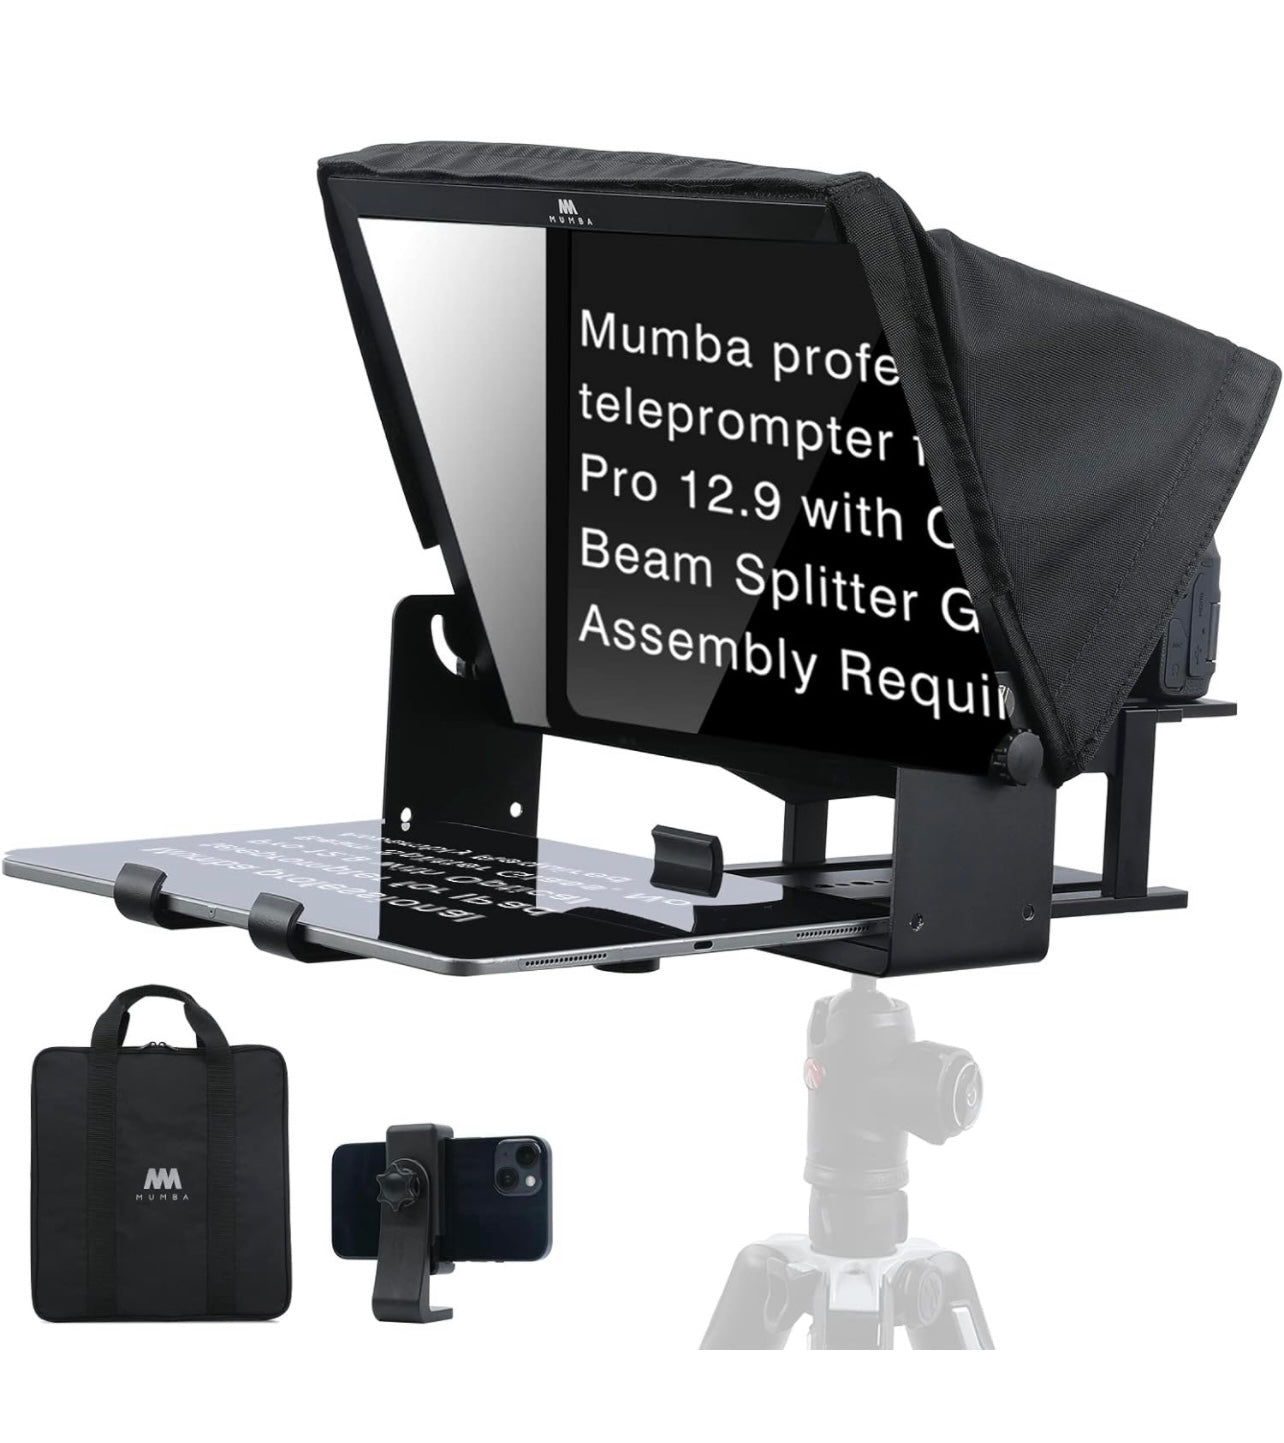 Mumba D15 Large Teleprompter for Camera, 15" Beam Splitter 70/30 Glass, No Assembly Required, All Aluminum Alloy Body with Waterproof Tote, Content Creator kit and Live Streaming Equipment